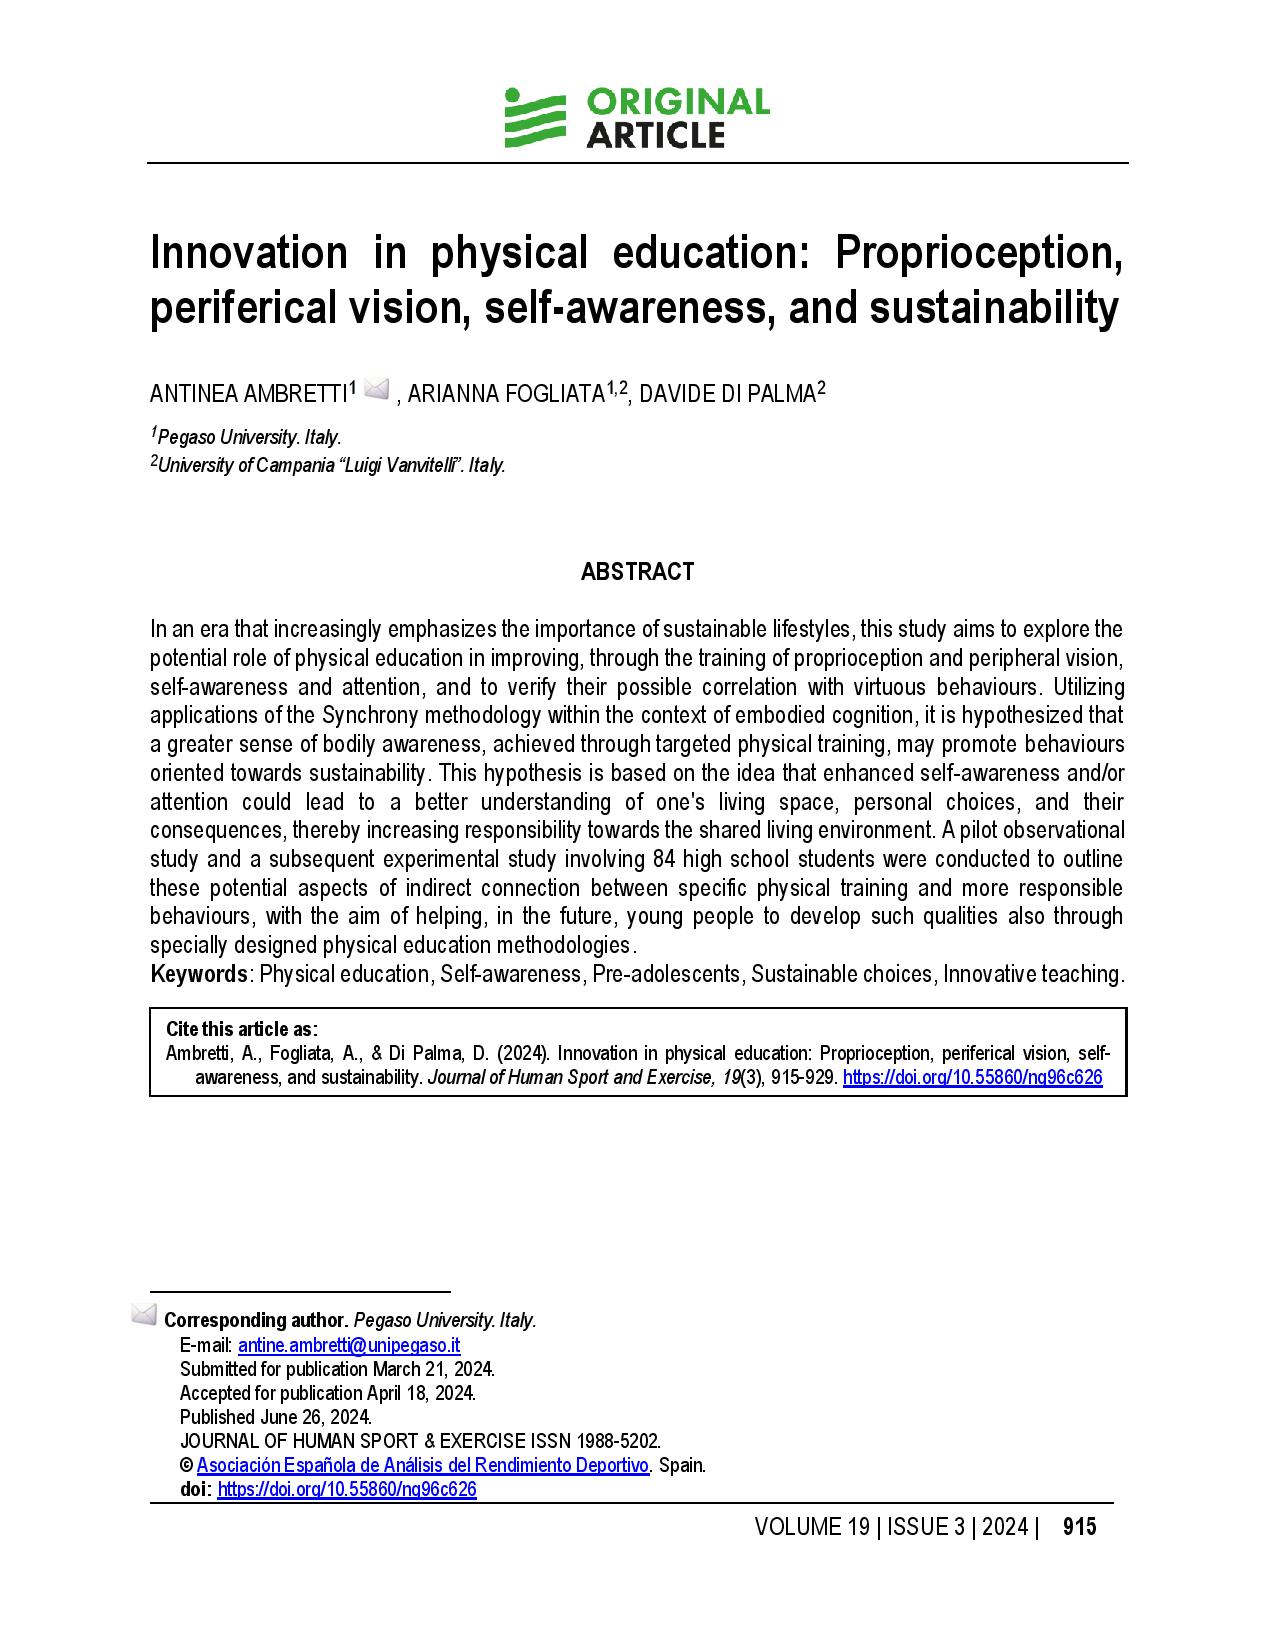 Innovation in physical education: Proprioception, periferical vision, self-awareness, and sustainability